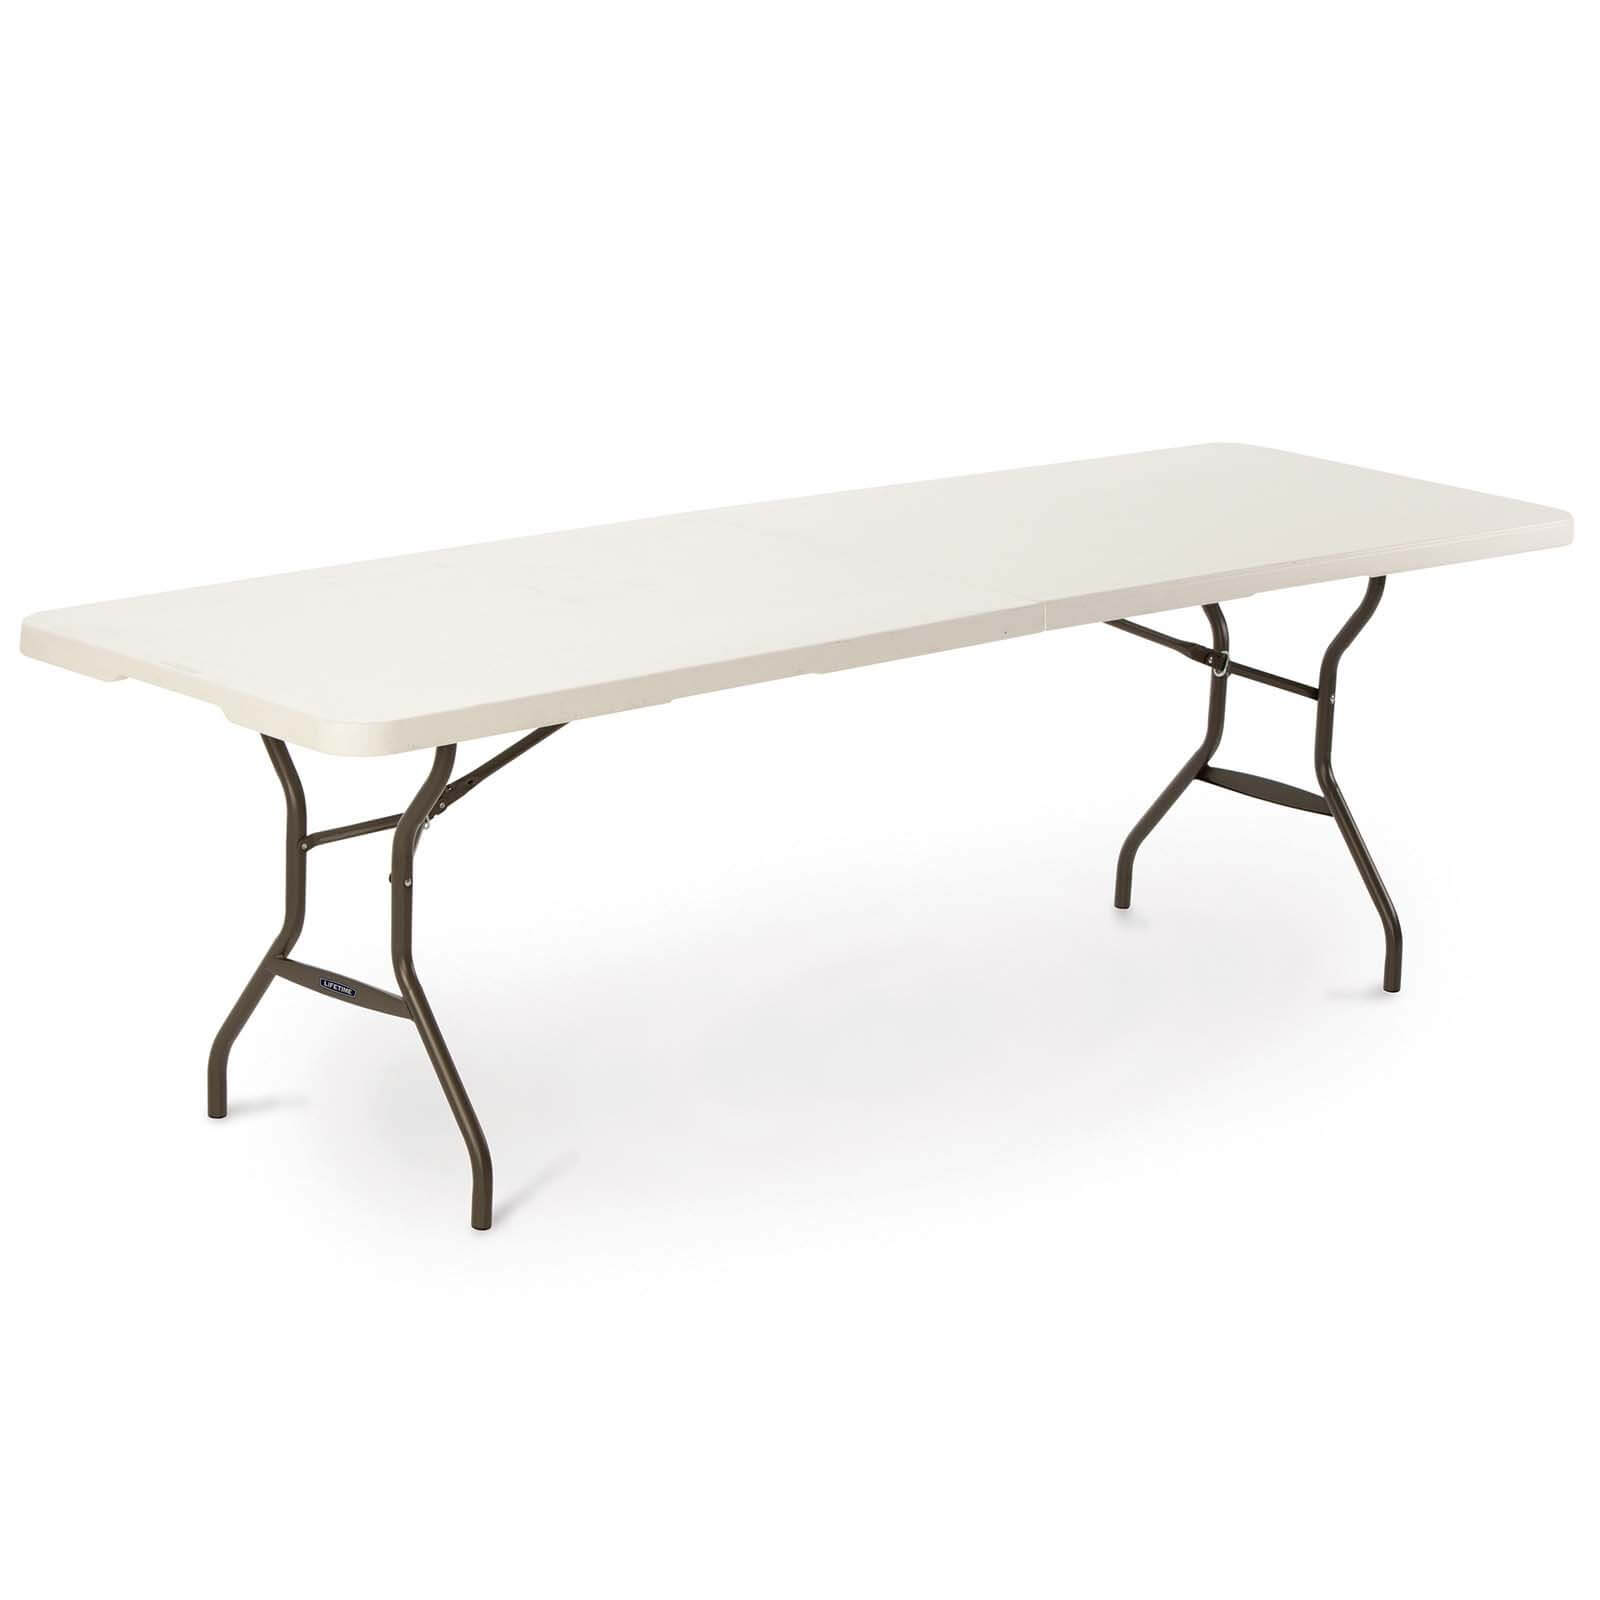 Lifetime 8-Foot Fold-In-Half Table (Light Commercial)